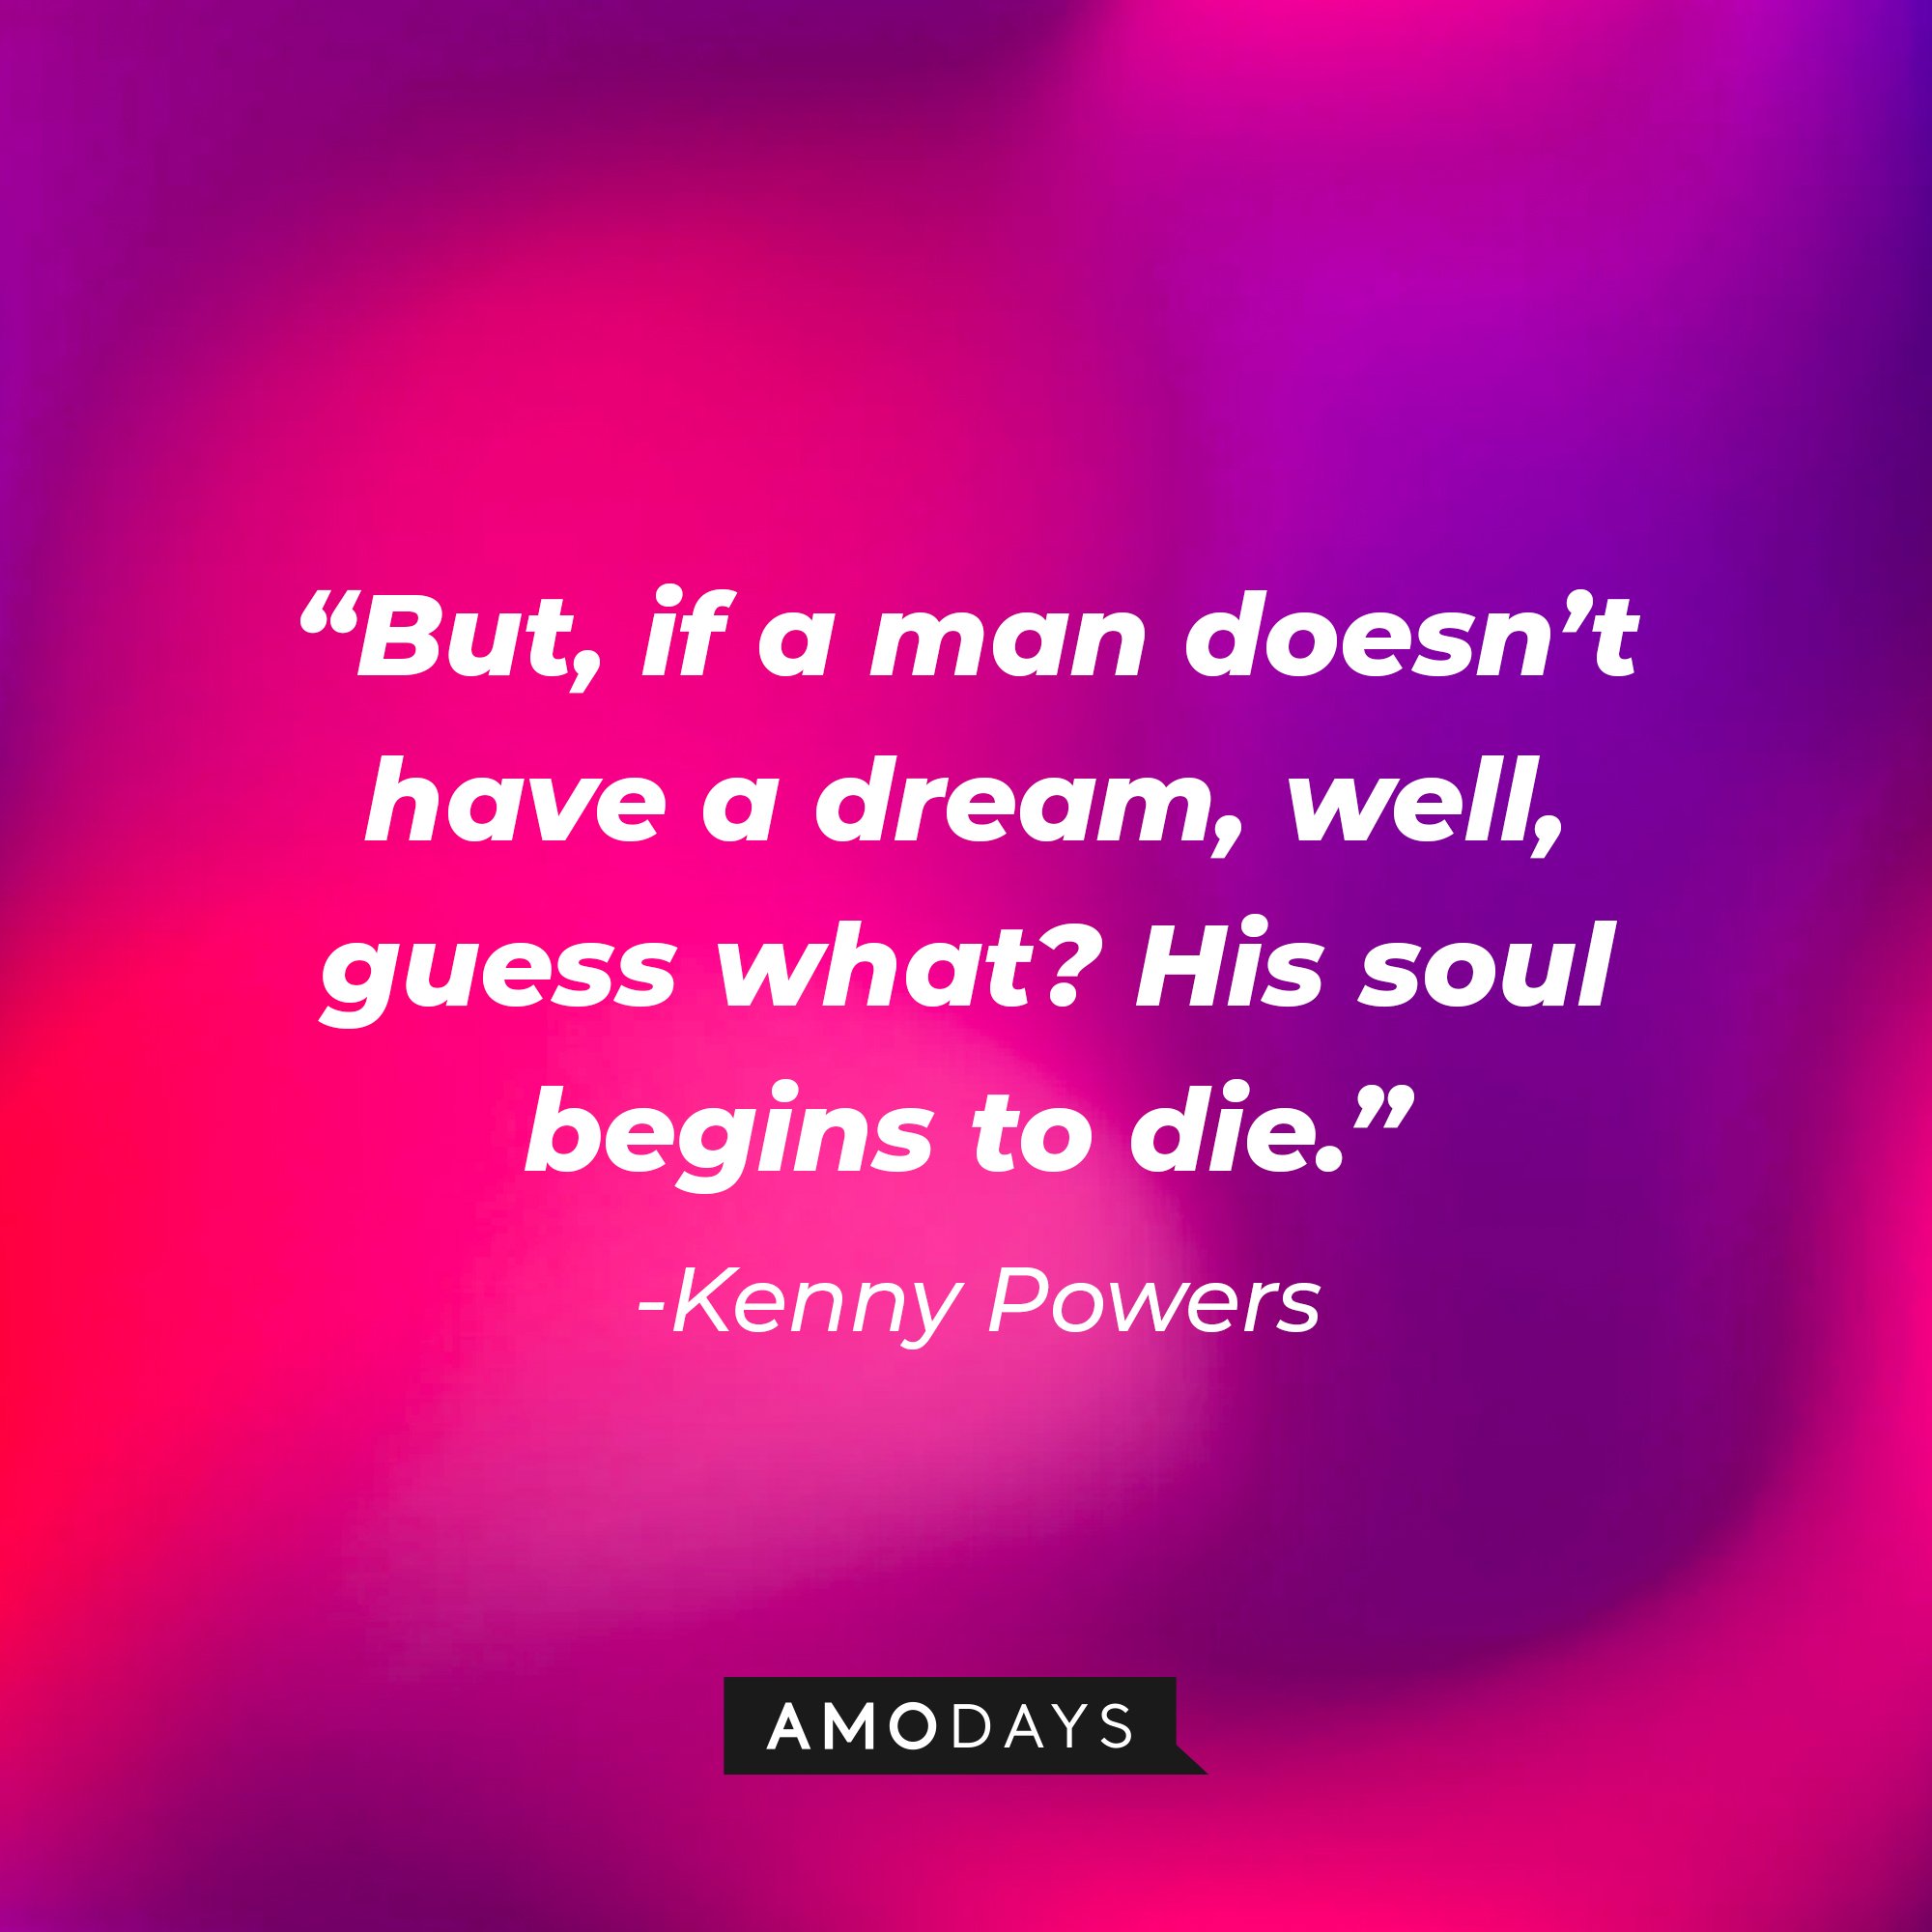  Kenny Powers’ quote: “But, if a man doesn't have a dream, well, guess what? His soul begins to die.” | Image: AmoDays